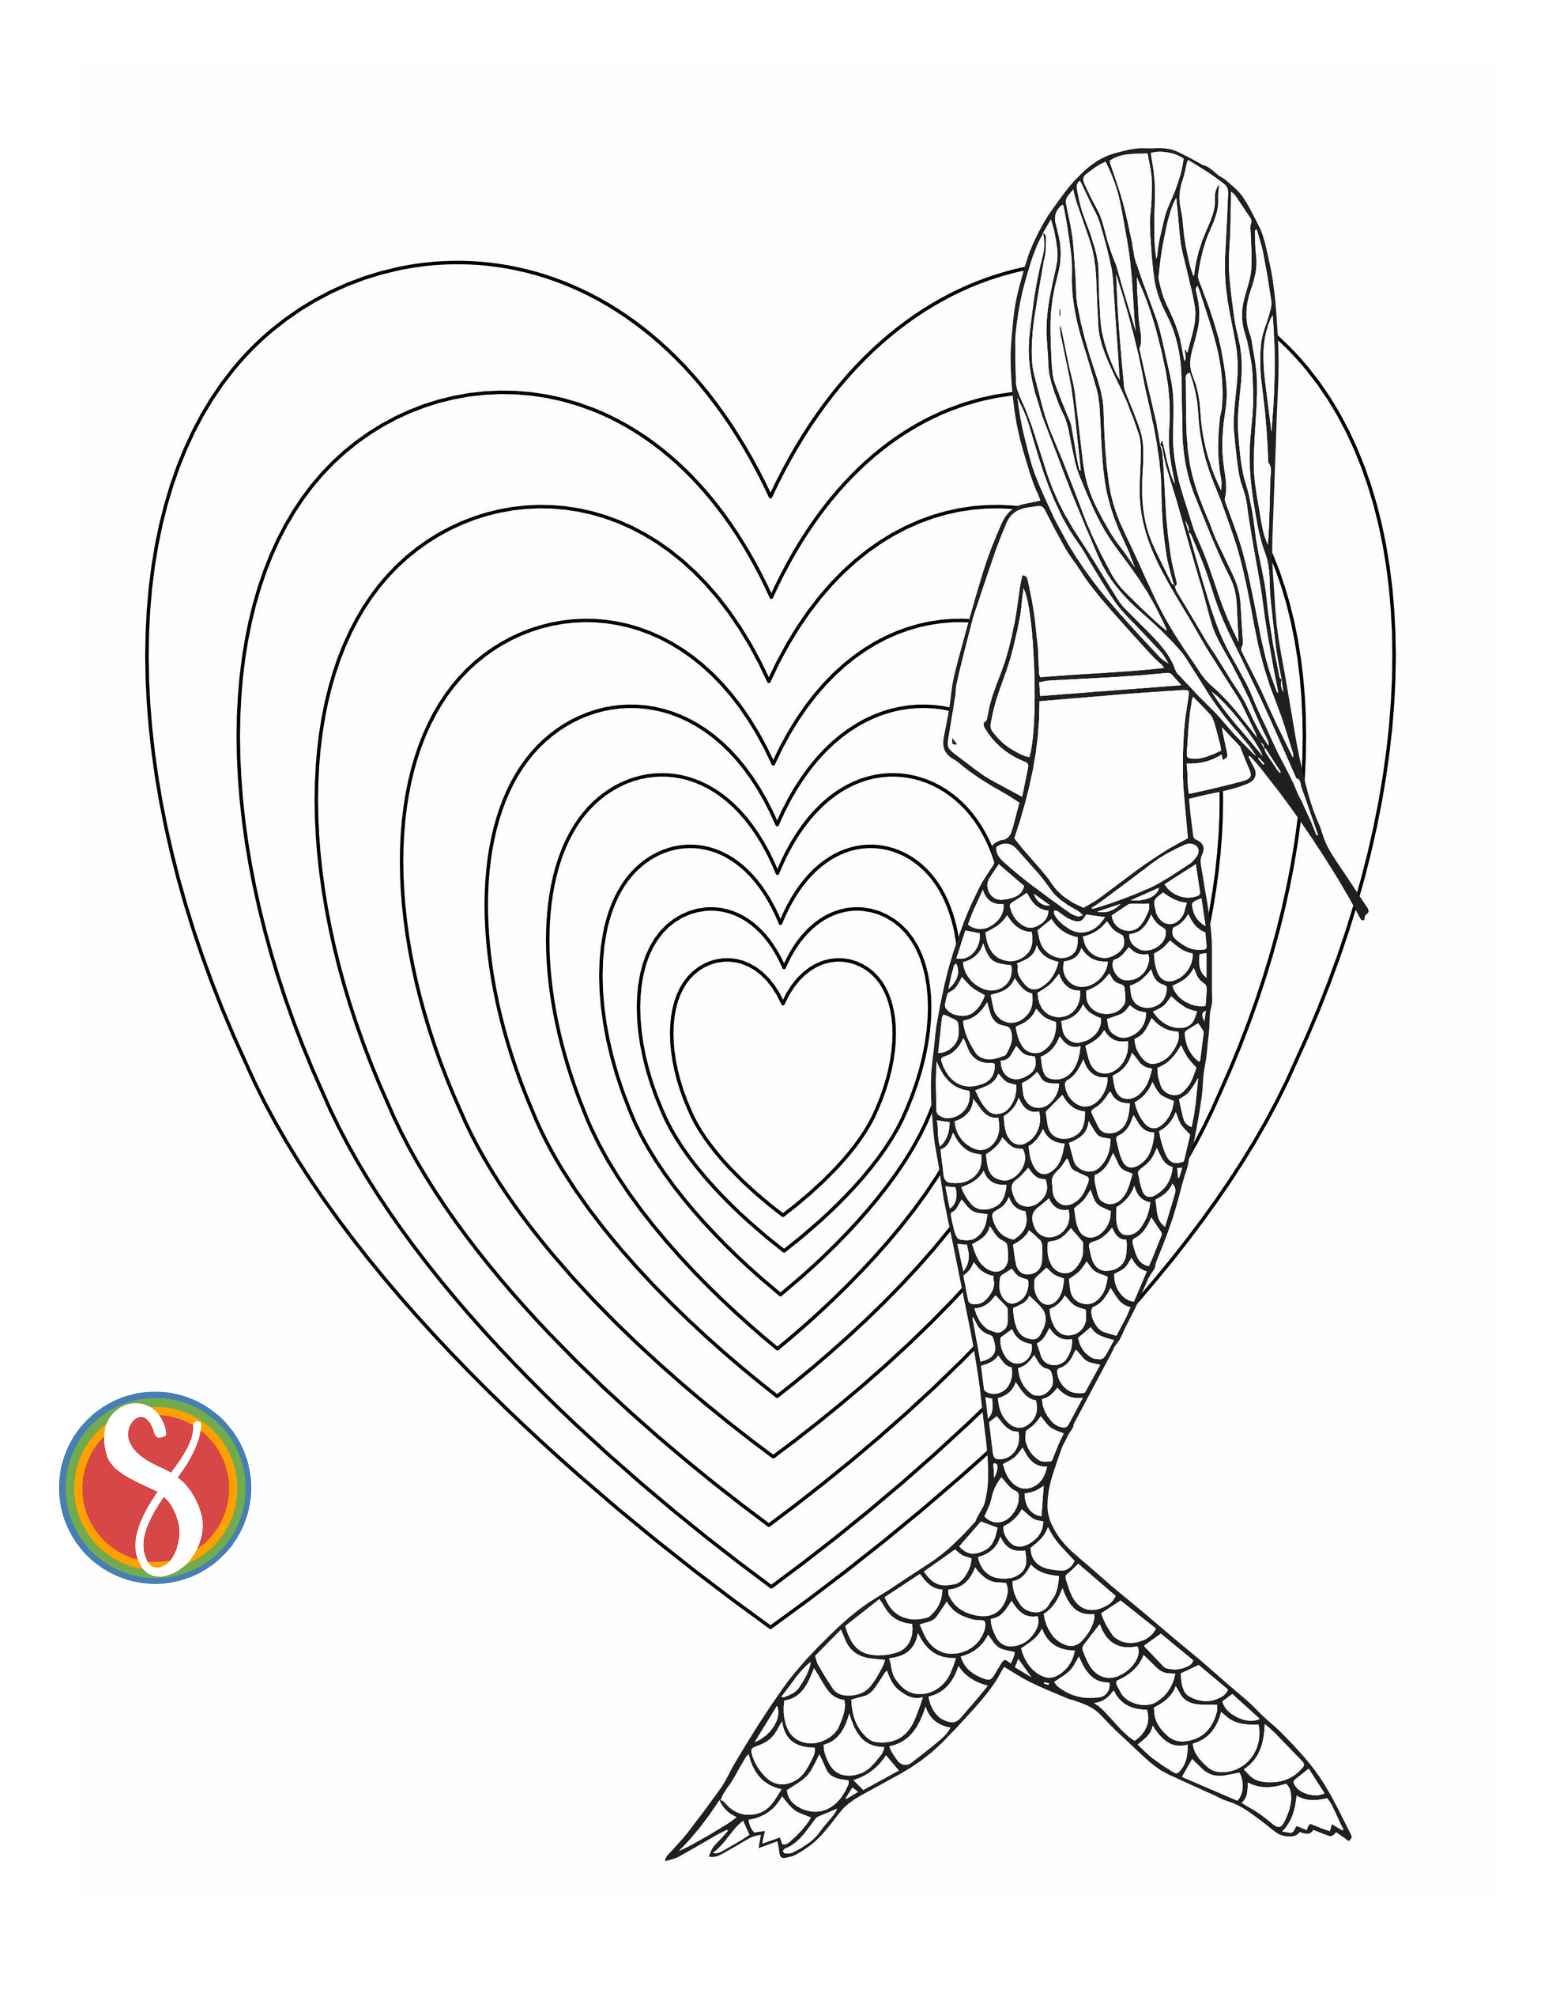 a full body mermaid from the back, she is all colorable with scales on her tail to color. There is a background of 7 hearts to color, each heart fits into a slightly bigger heart